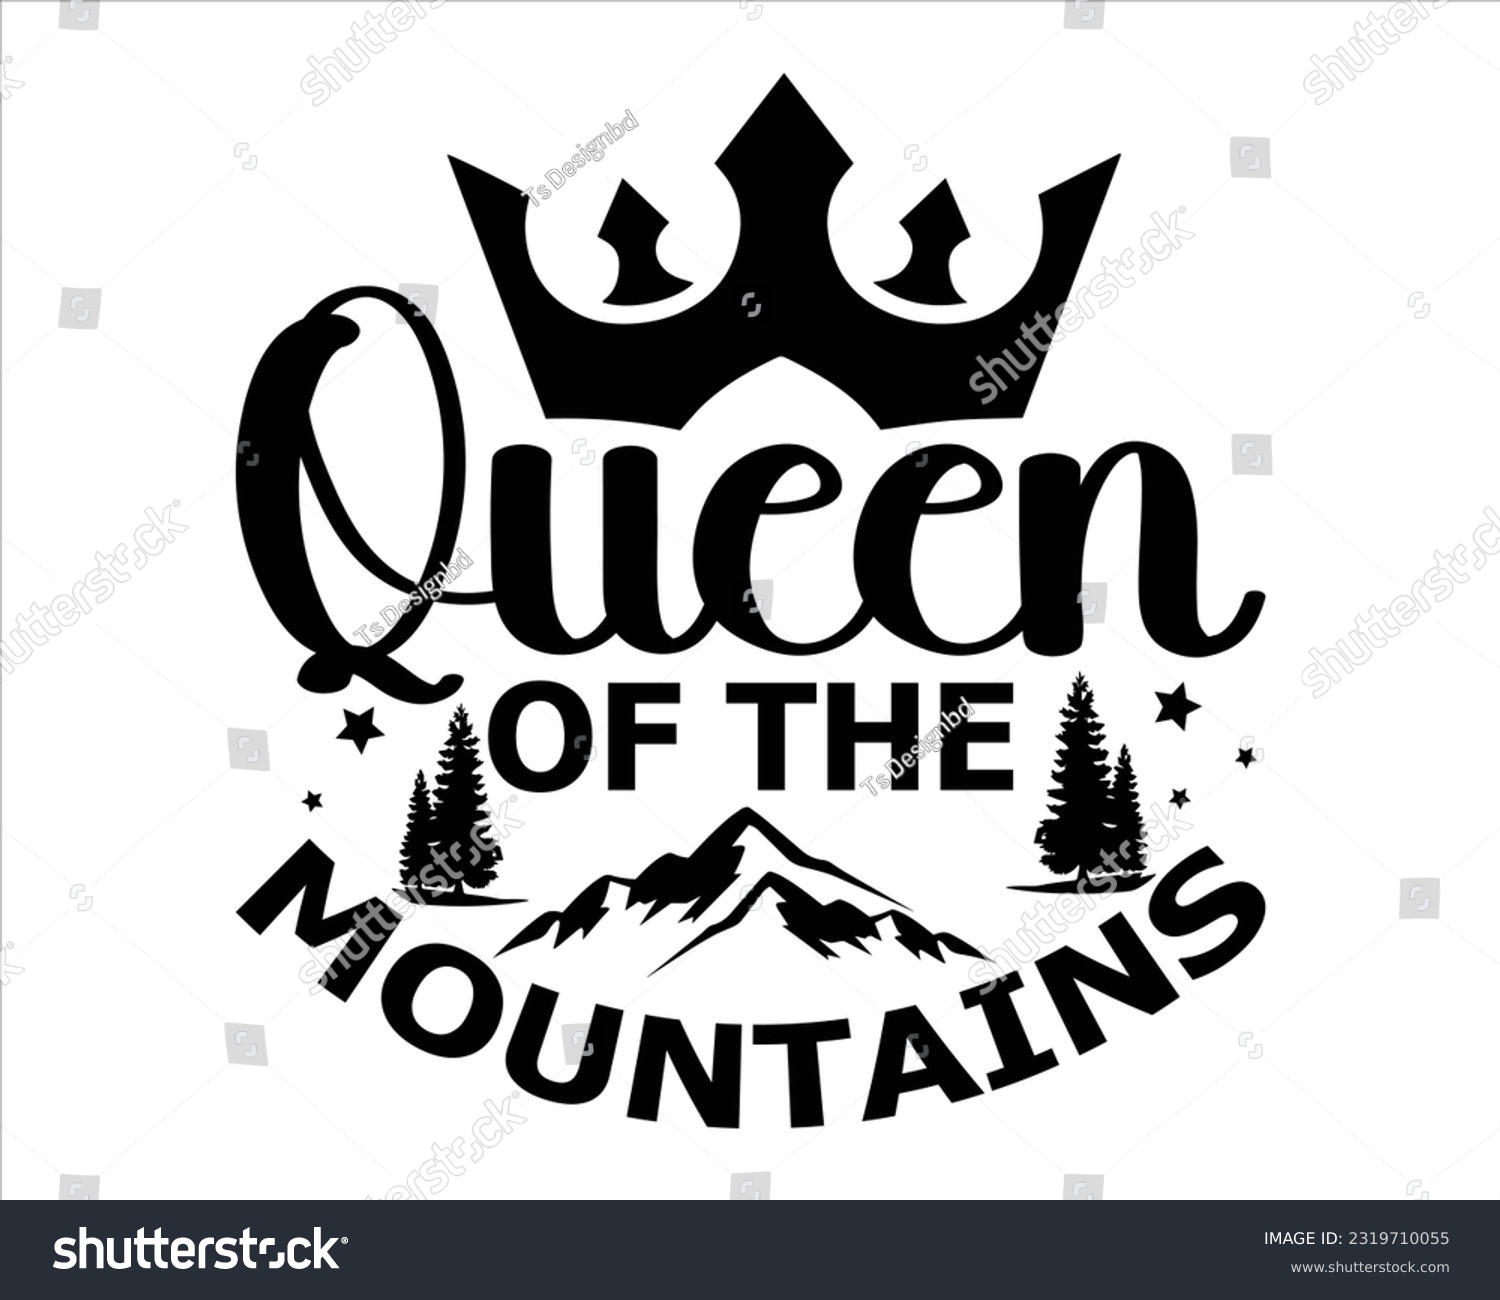 SVG of Queen Of The Mountains Svg Design, Hiking Svg Design, Mountain illustration, outdoor adventure ,Outdoor Adventure Inspiring Motivation Quote, camping, hiking svg